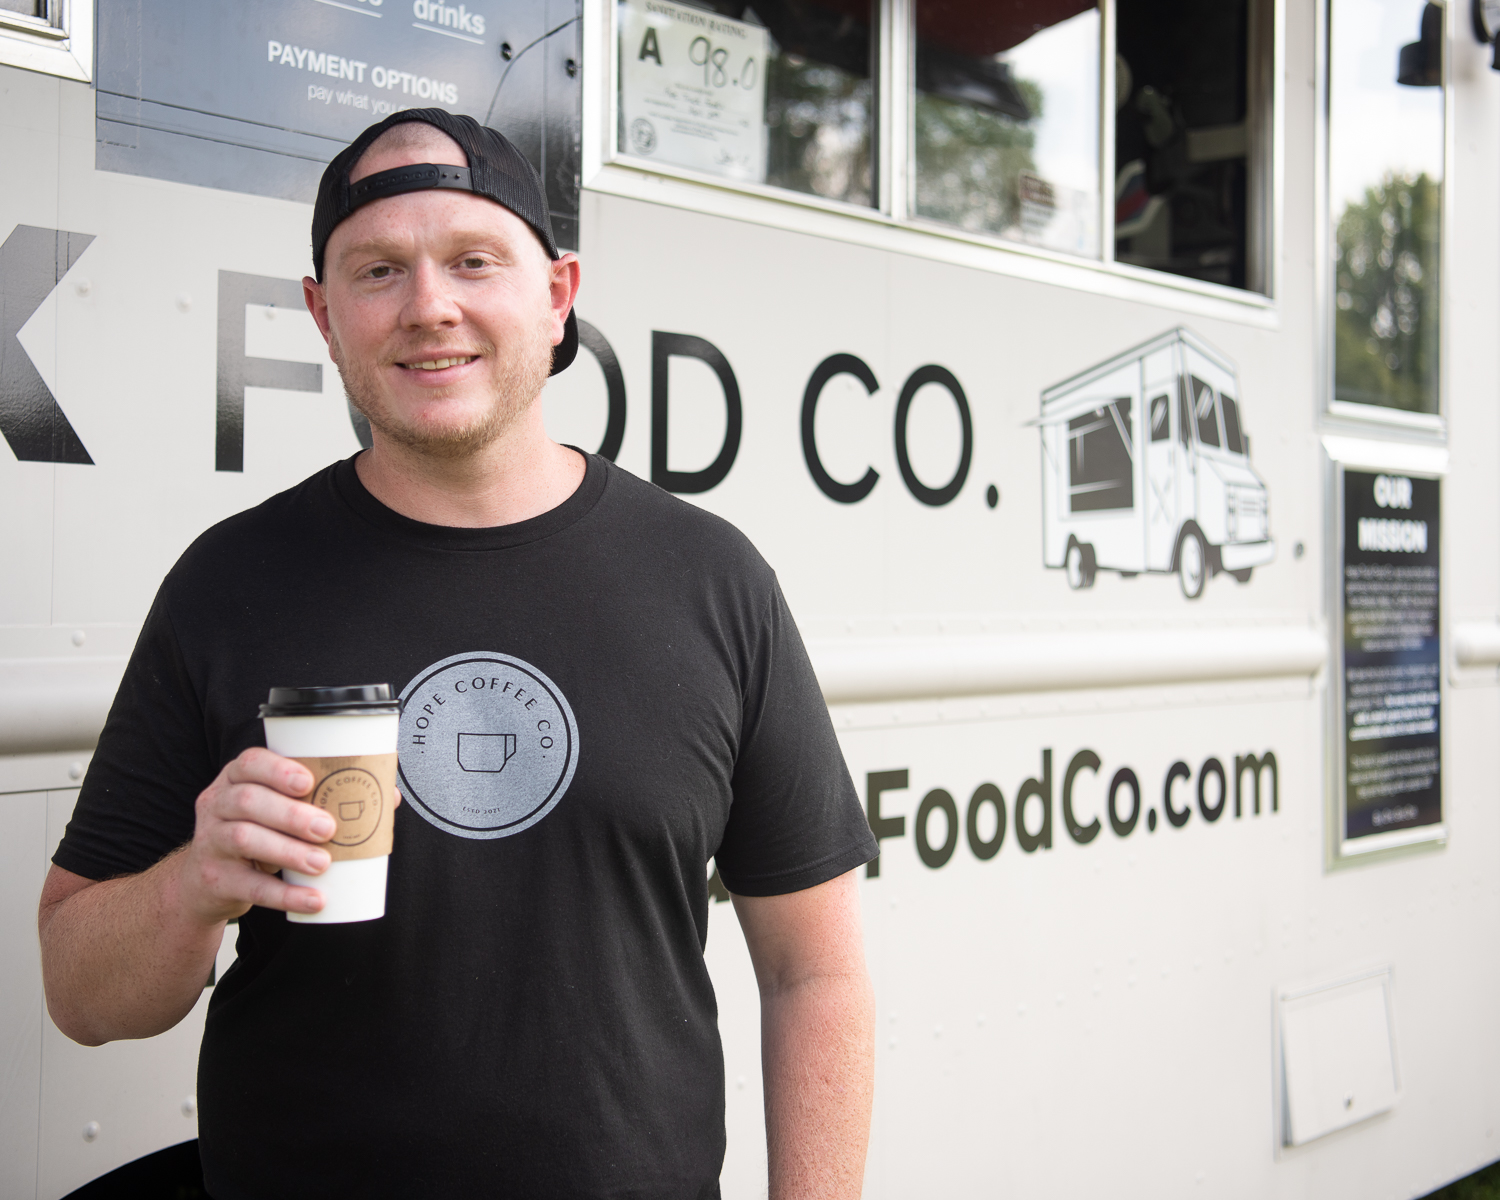 Charles Myers, Manager of Given Coffee, stands in front of the Hope Truck Food Co. truck in High Point, NC.